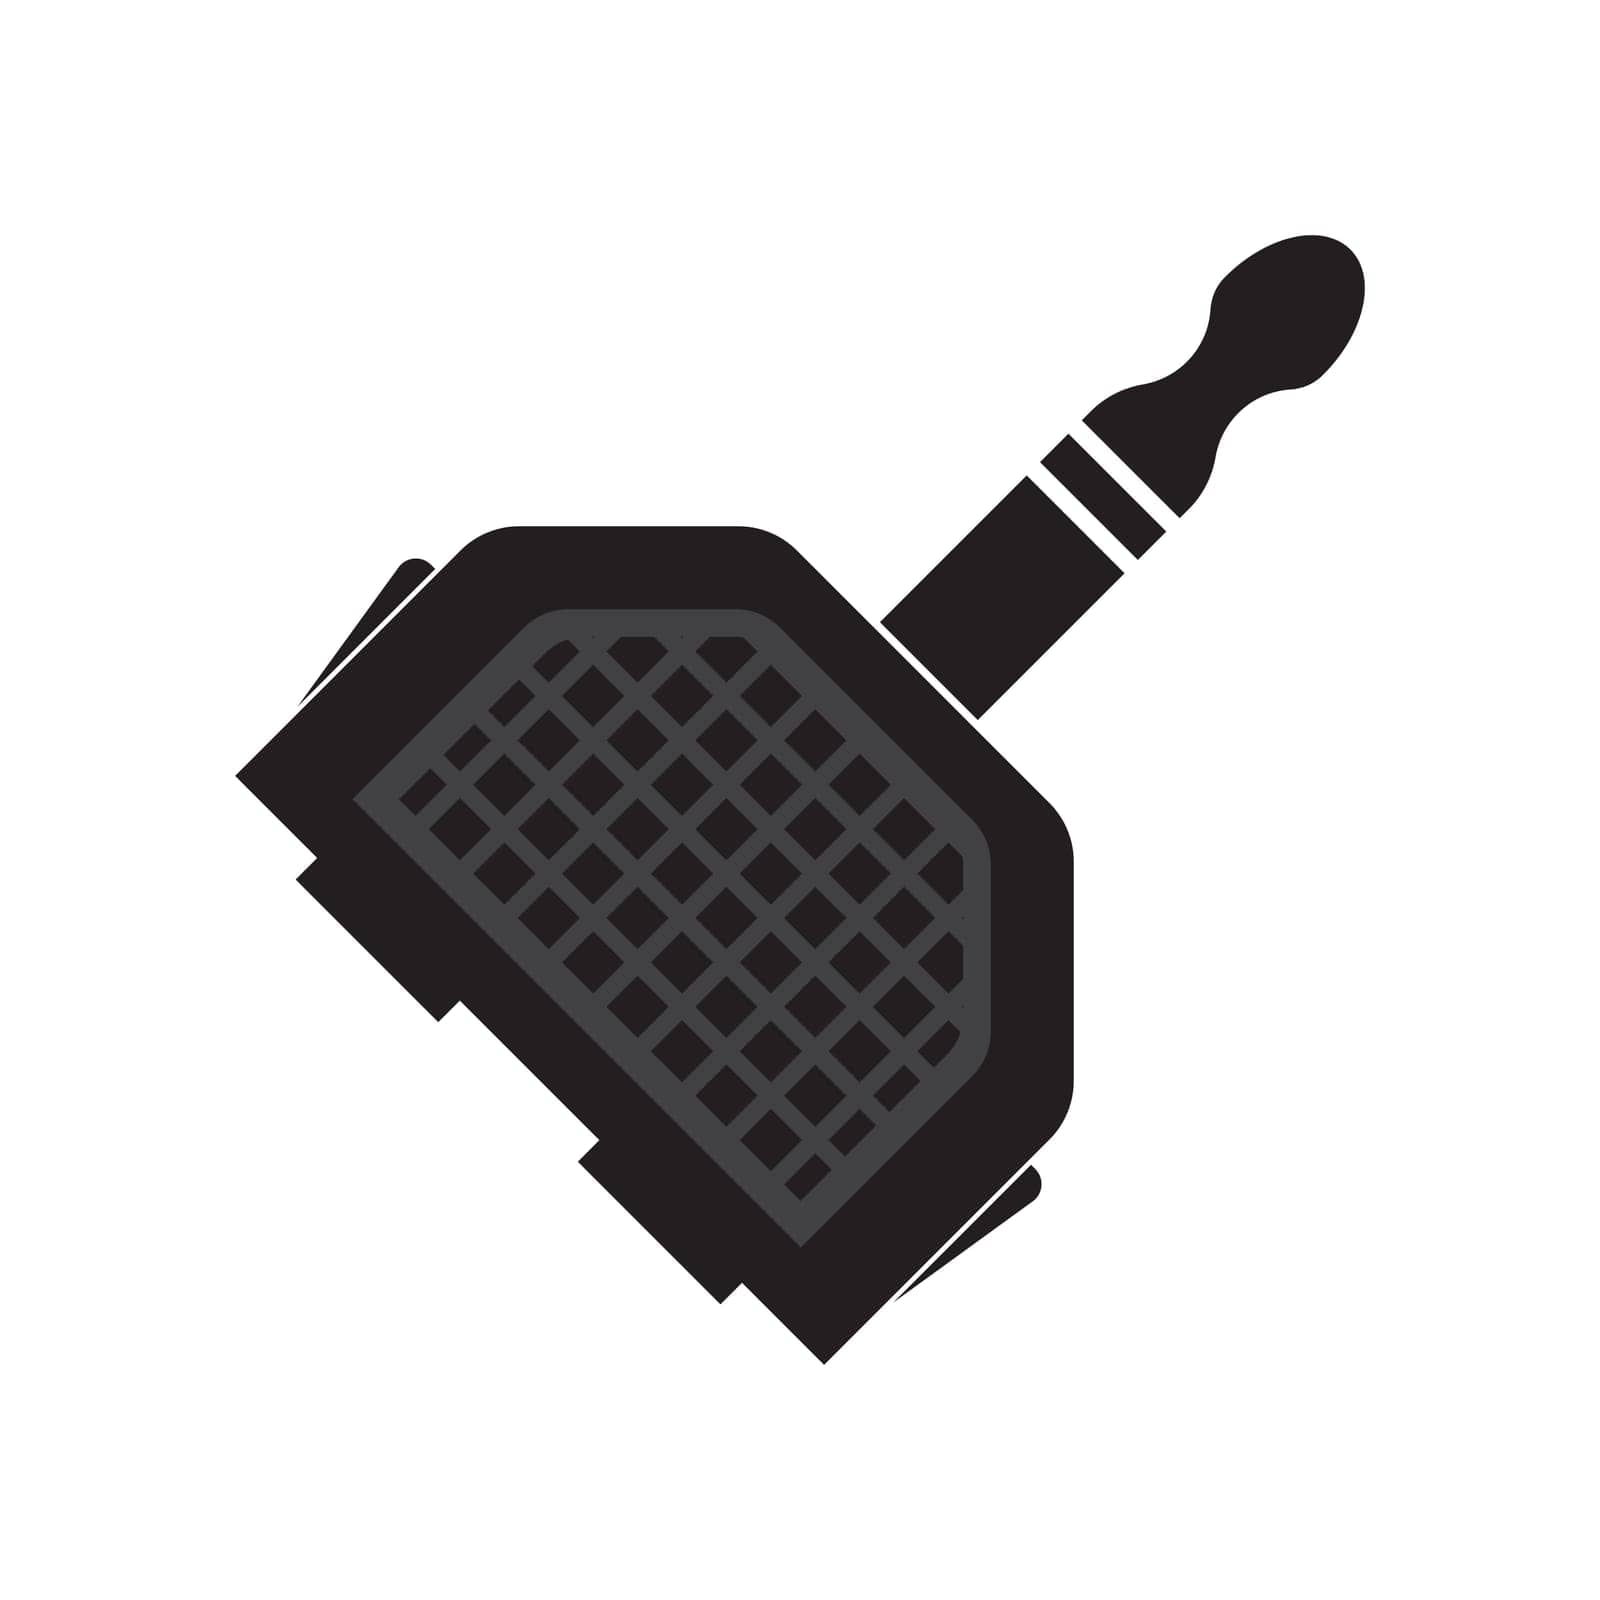 Audio jack icon by rnking